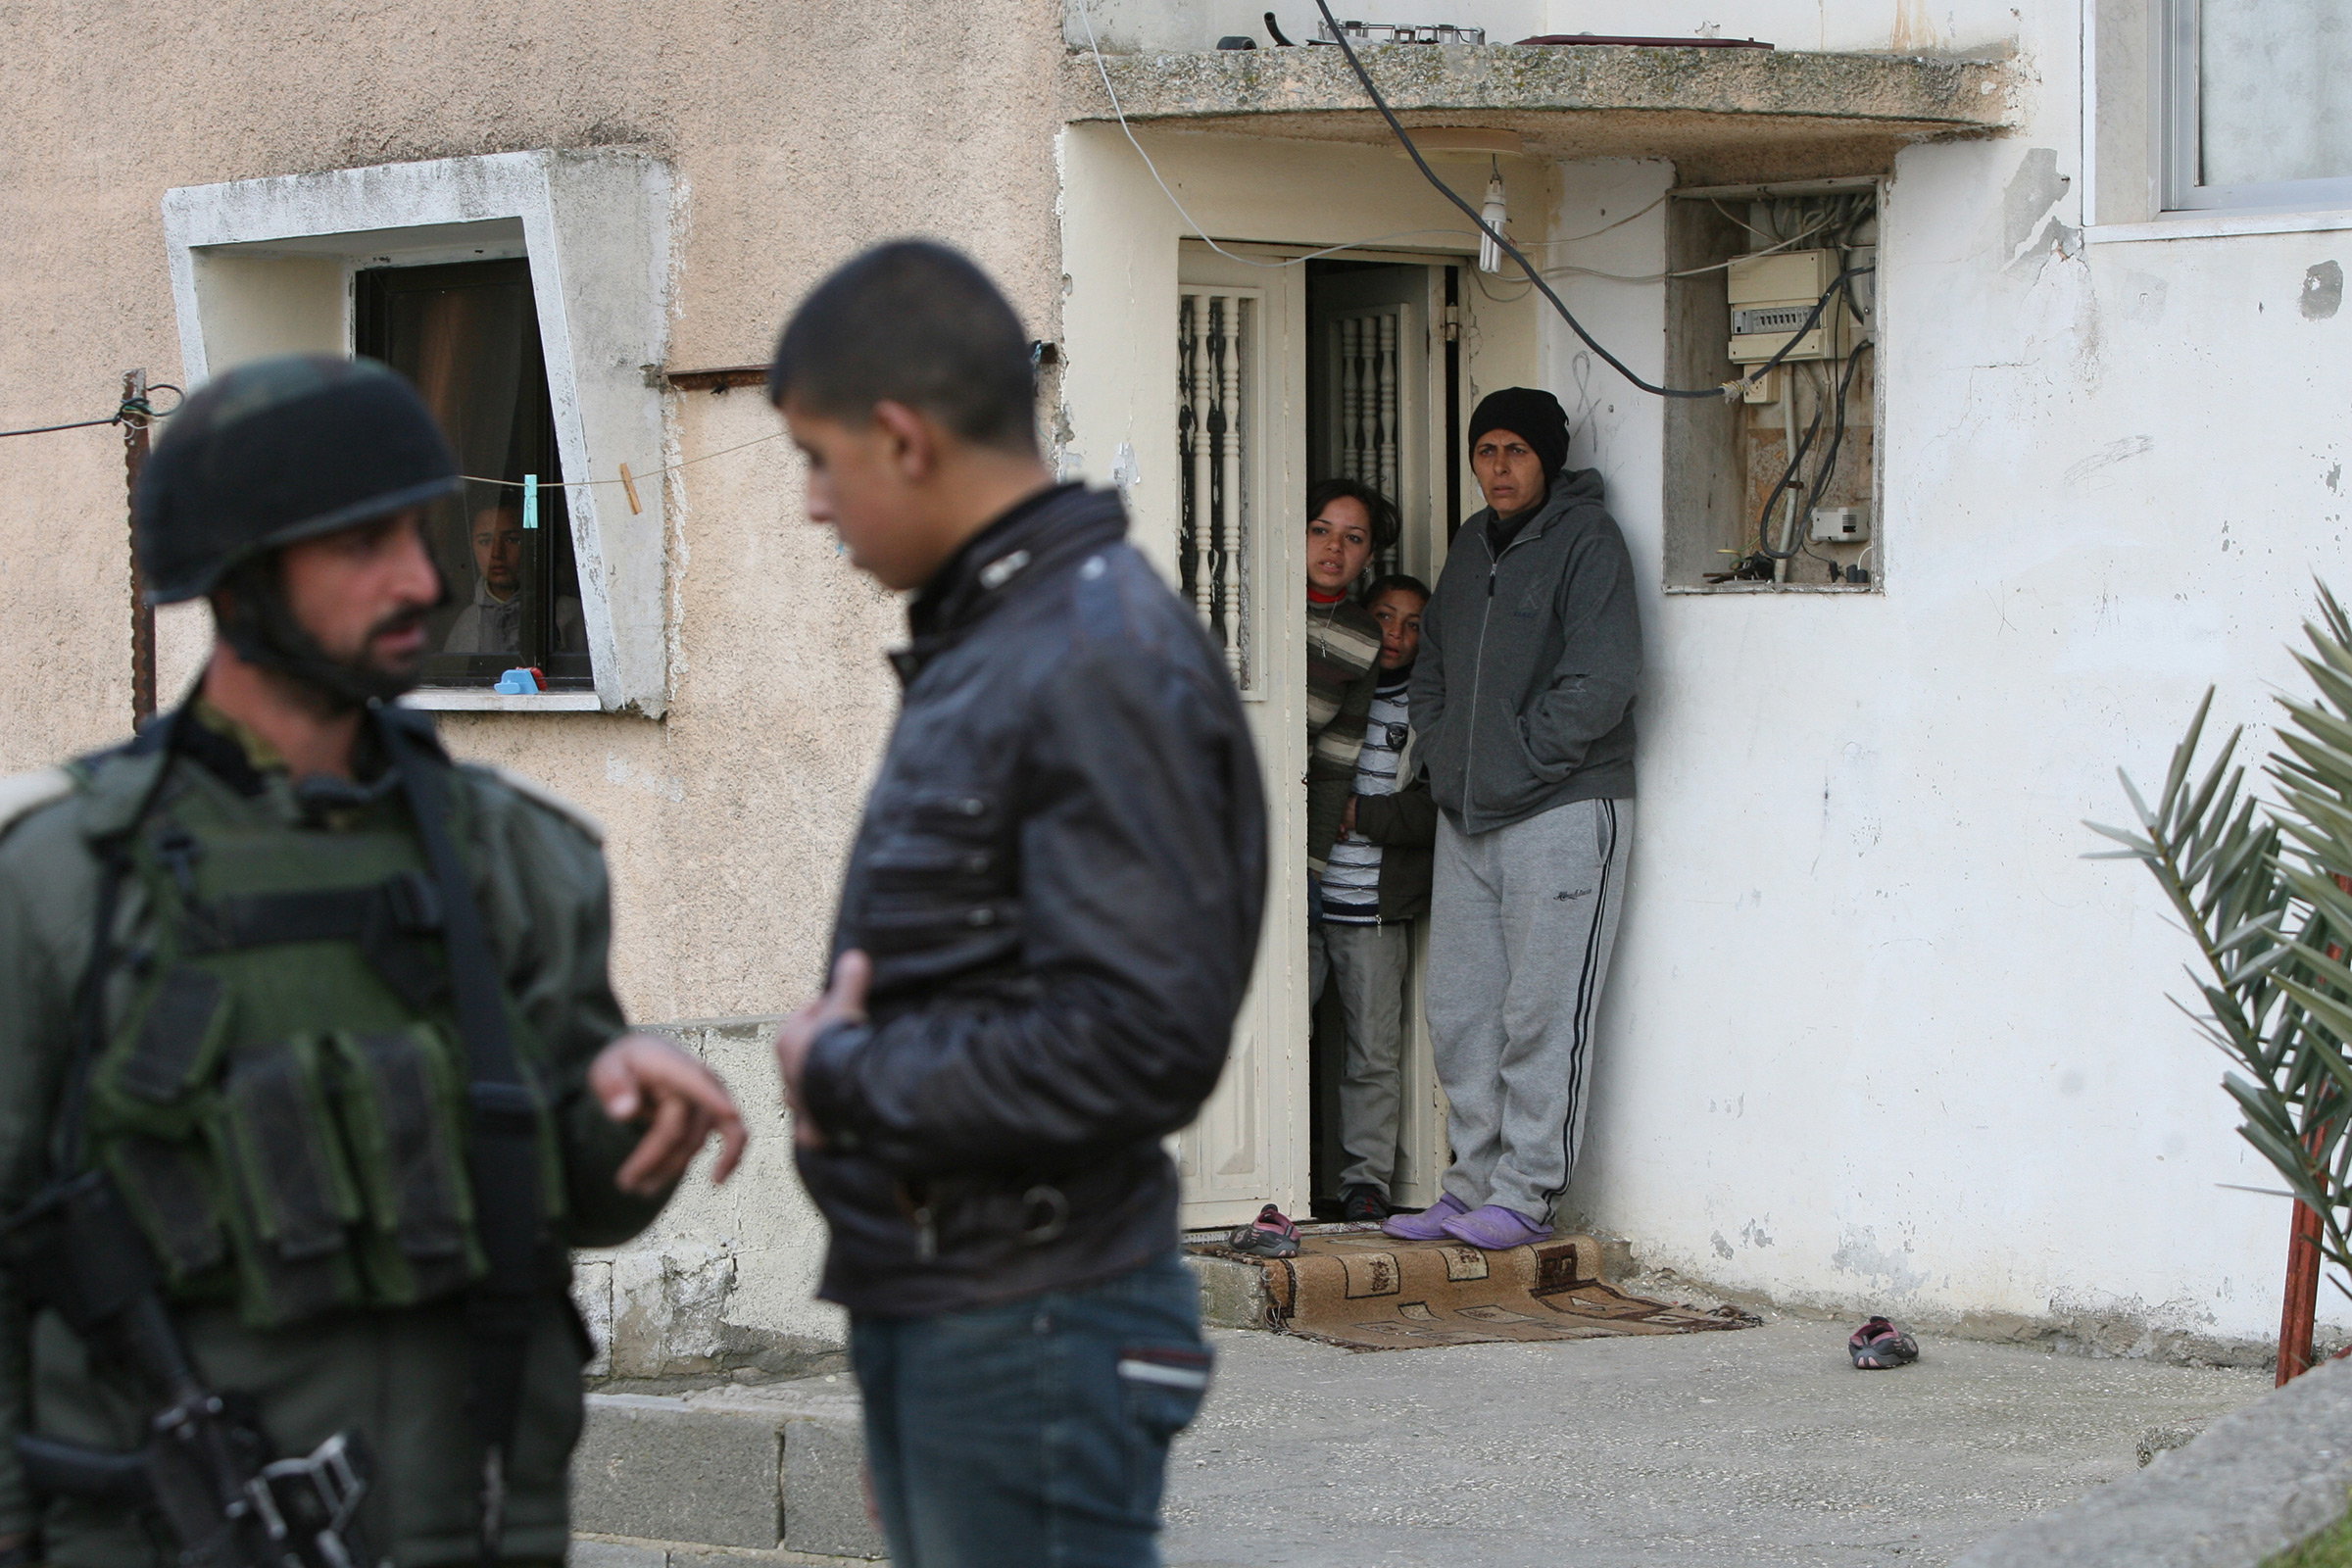 Israeli soldiers question Palestinians and search houses in the village of al-Tabaqa, near Dura in the southern West Bank region of Hebron, on Feb. 16, 2012.